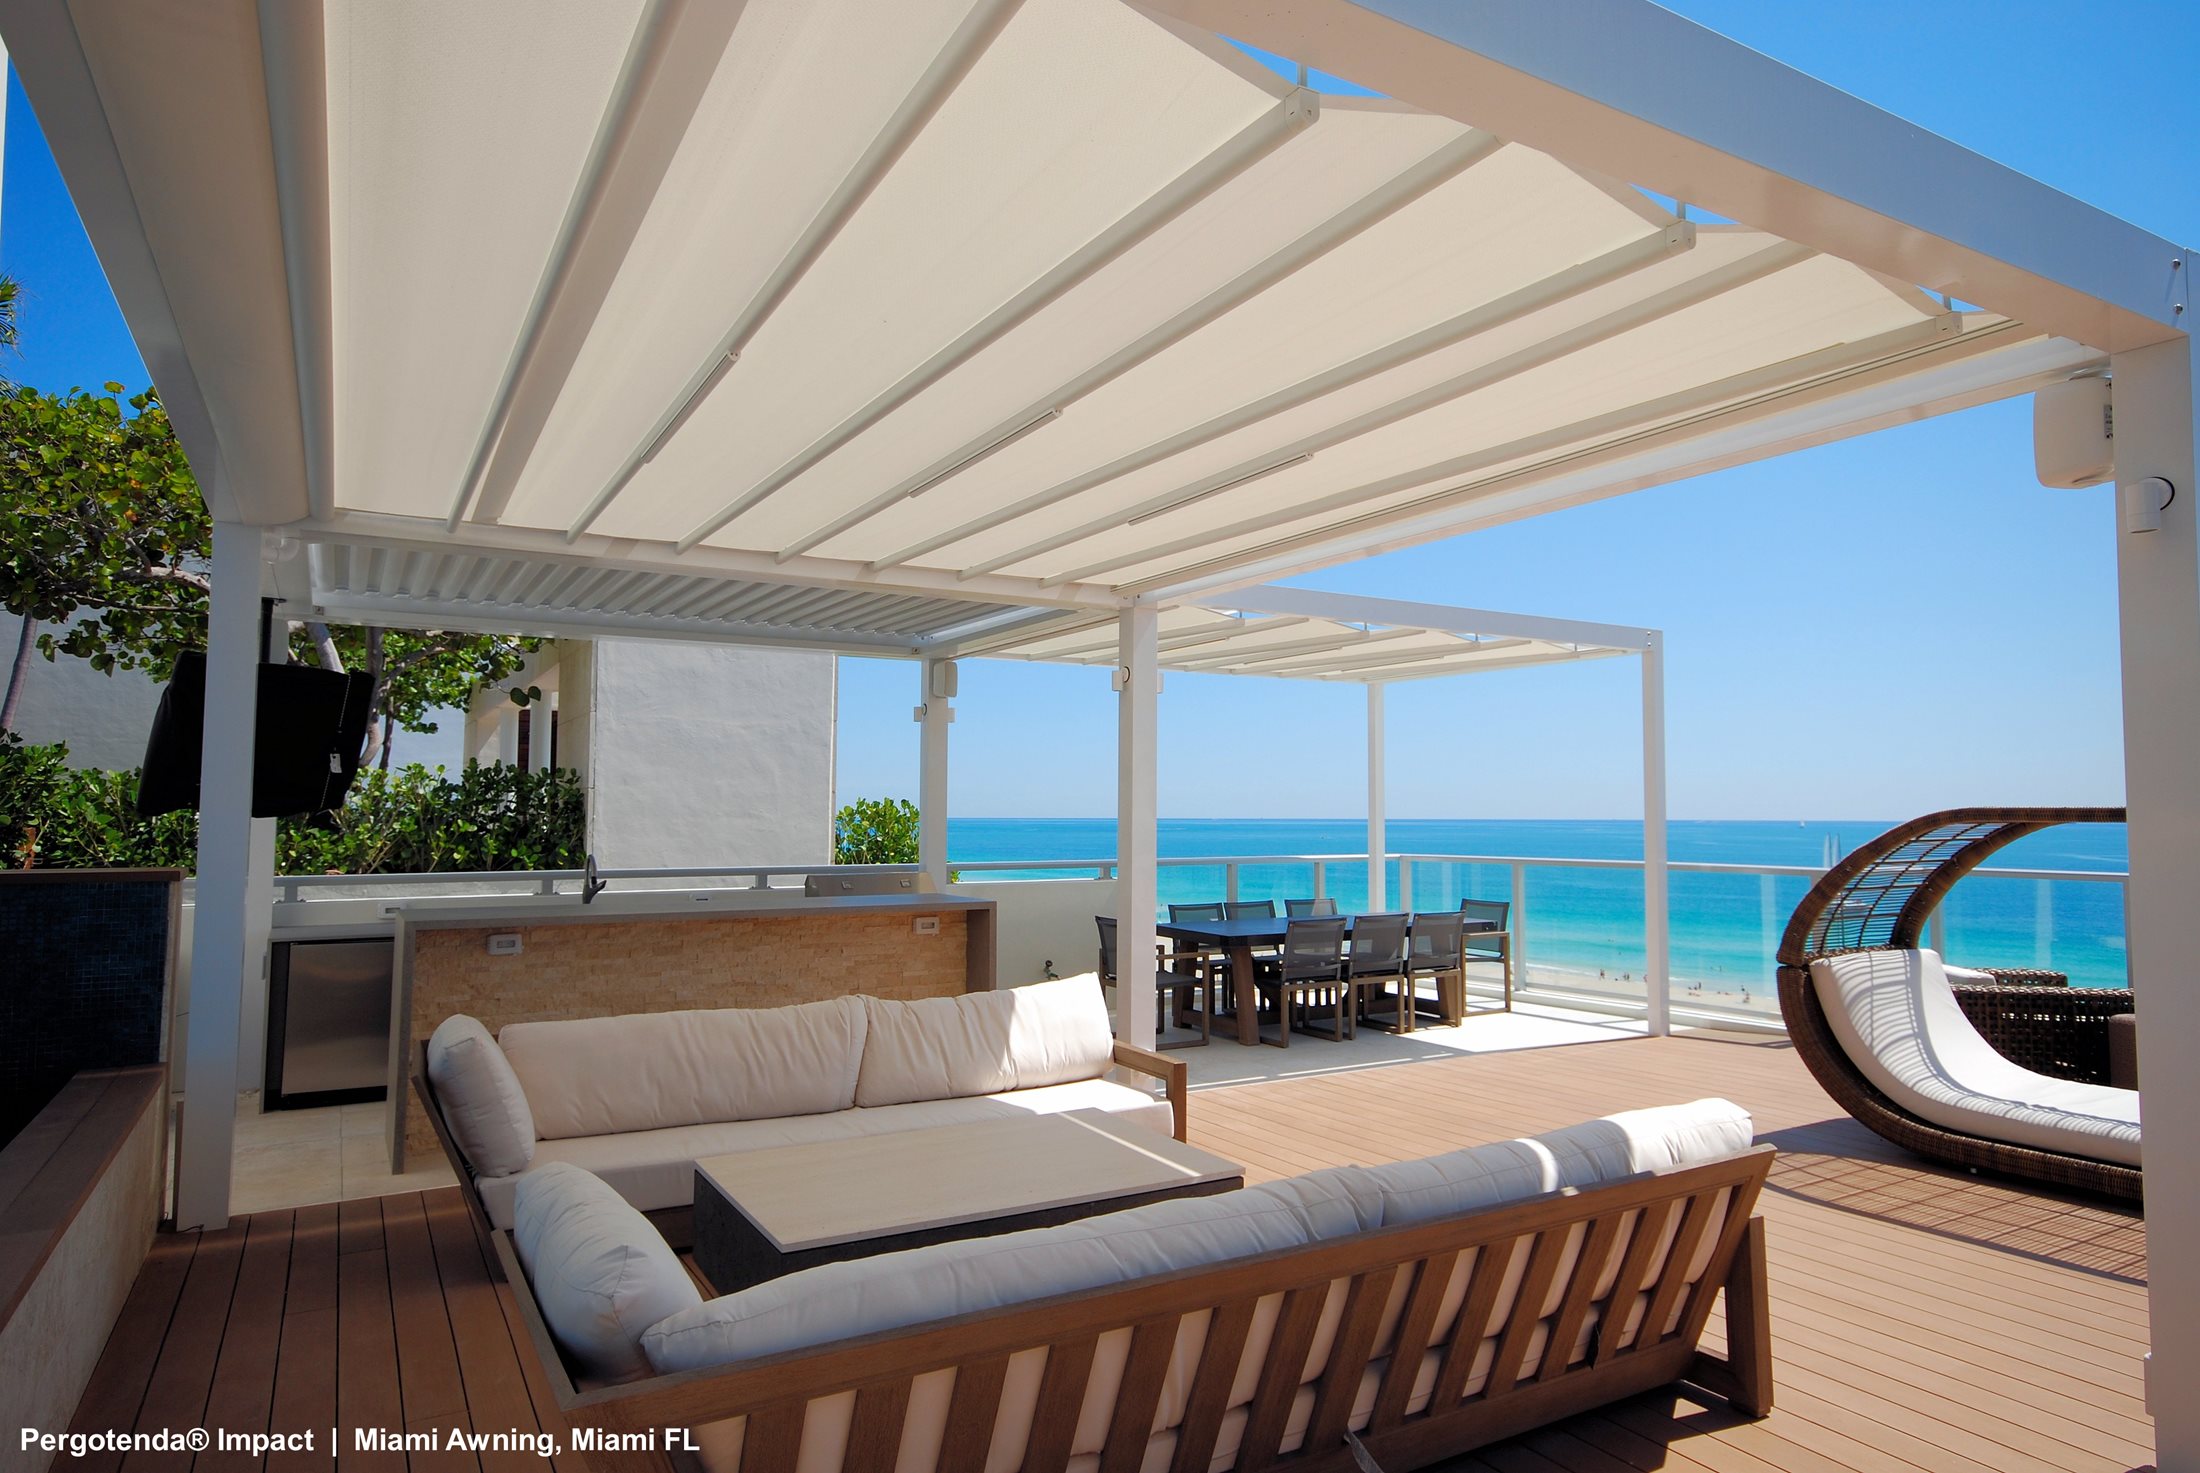 Residence-with-two-Corradi-Shade-Structures-penthouse-area-by-Miami-Awning-Co-(1).jpg